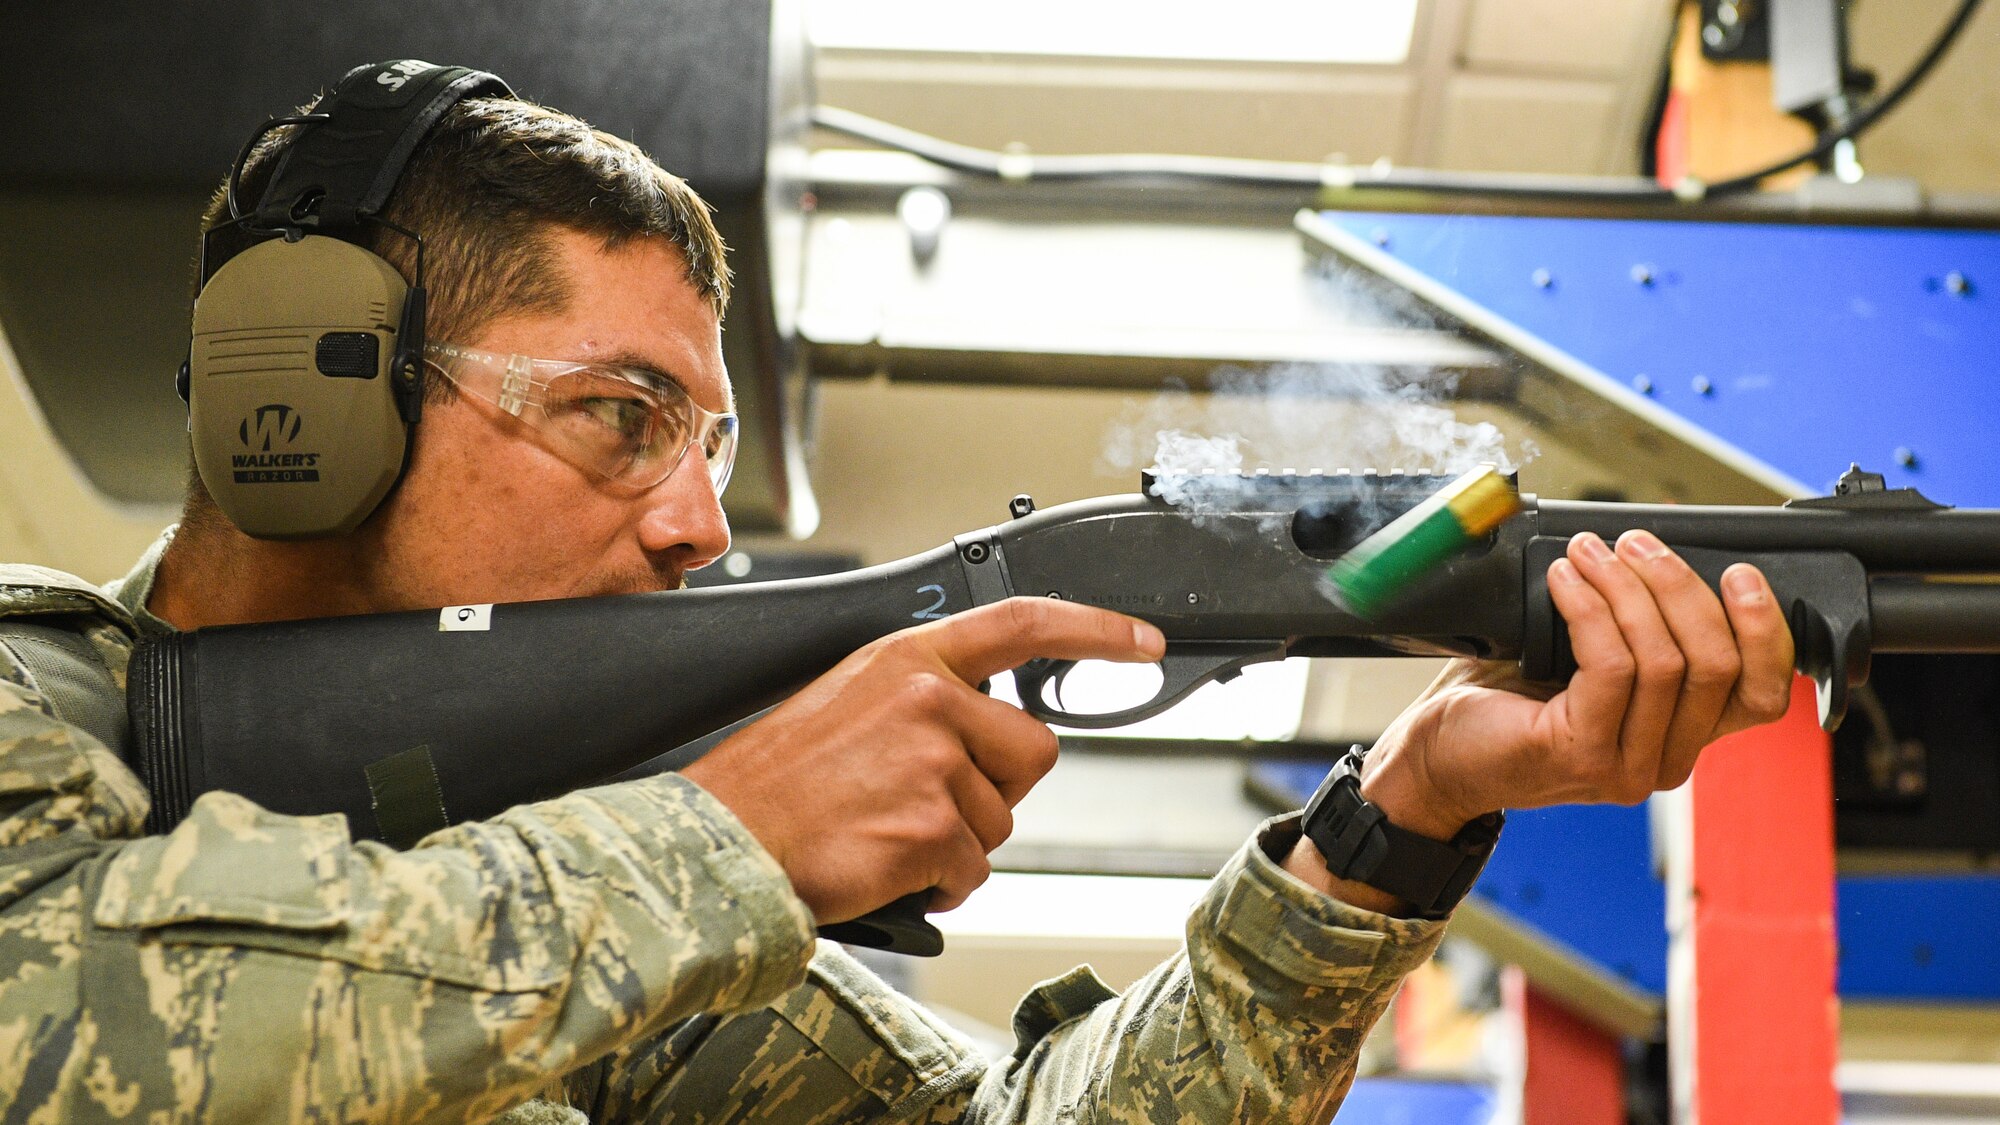 Technical Sgt. Jakob Haase, a security forces defender from the 72nd Security Forces Squadron, Tinker Air Force Base, Okla., fires an M870 shotgun Sept. 7, 2018, at Hill AFB, Utah. Haase was one of six Airmen selected to the security forces team representing Air Force Material Command at the 2018 Defender Challenge Sept. 10-14 at Camp Bullis Military Training Reservation, near San Antonio, Texas. The team will compete against 13 other teams from other U.S. Air Force major commands, Great Britain and Germany in the first 2018 Defender Challenge since 2004. (U.S. Air Force photo by R. Nial Bradshaw)